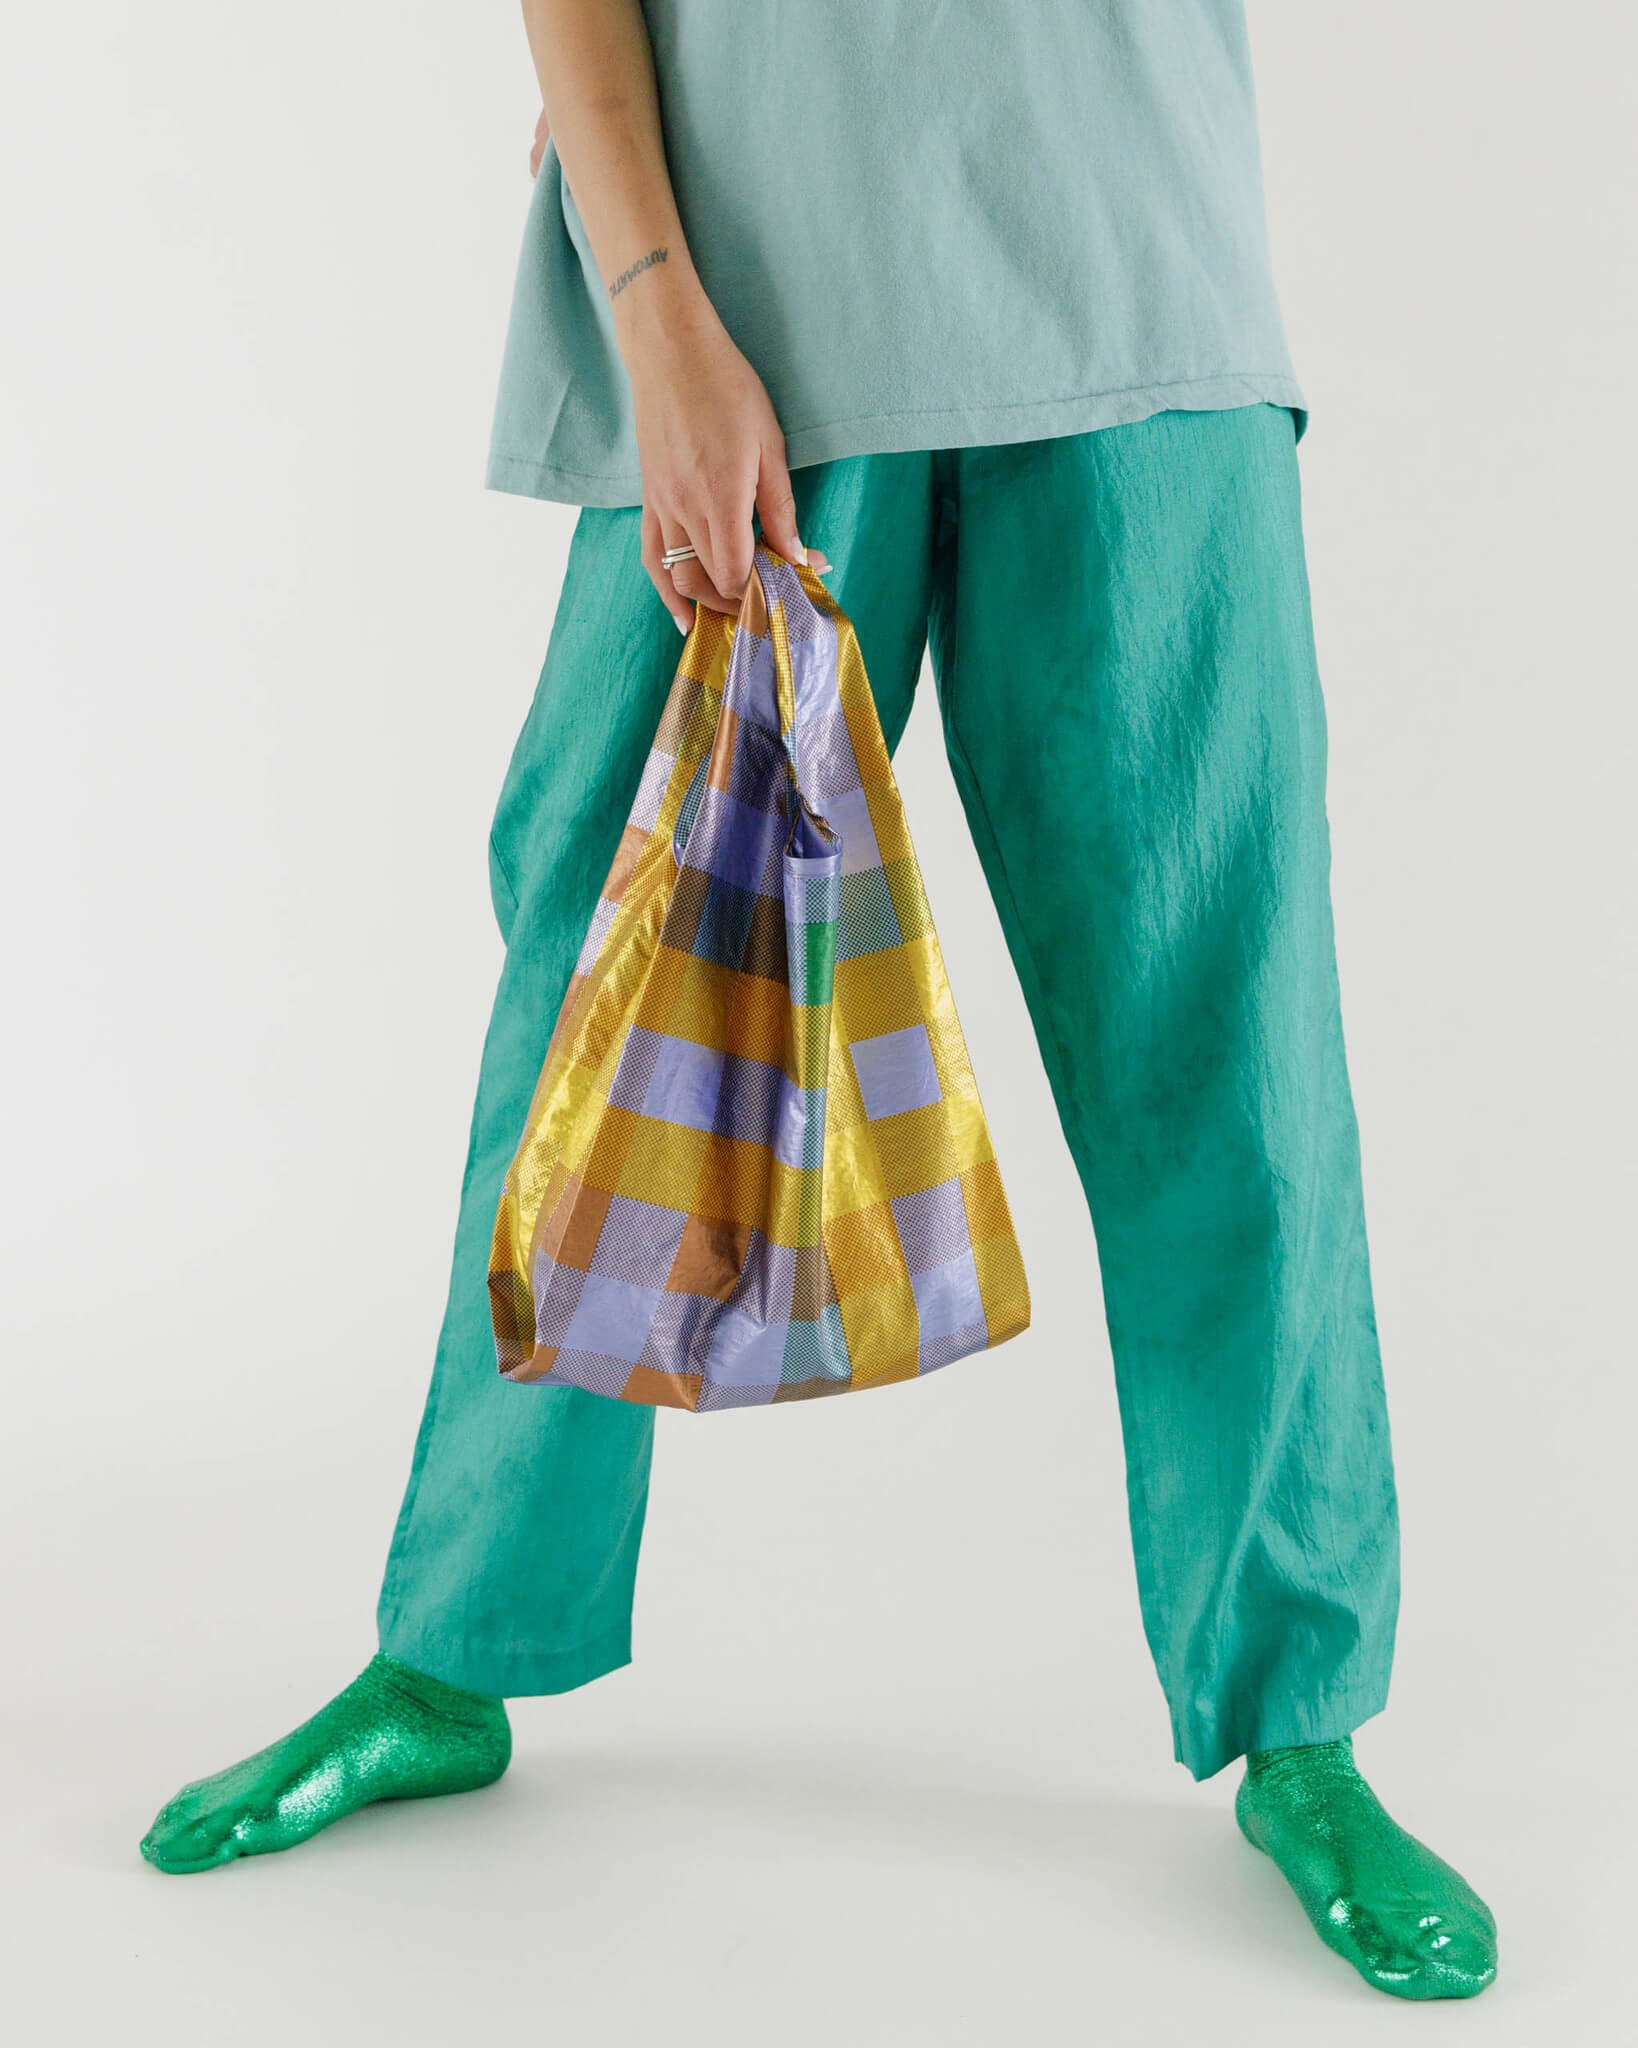 Person holding reusable shopping bag with metallic plaid pattern